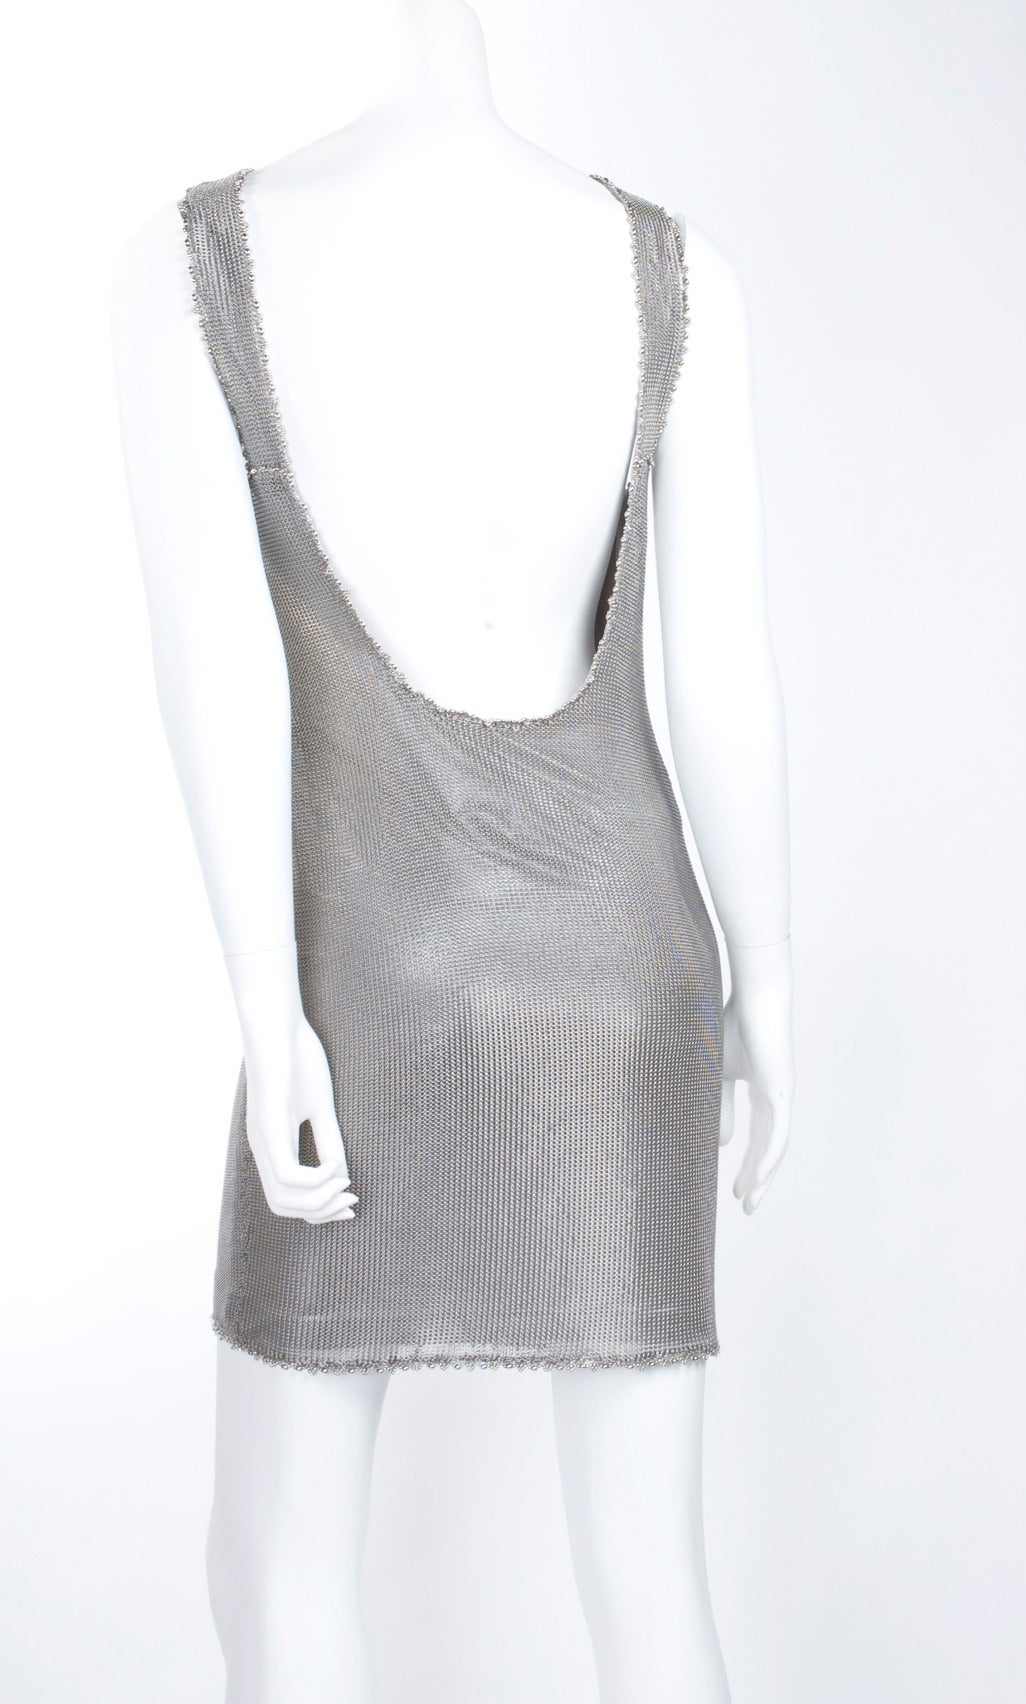 80's Atelier Gianni Versace Chain Link Metal Dress. For Sale 3